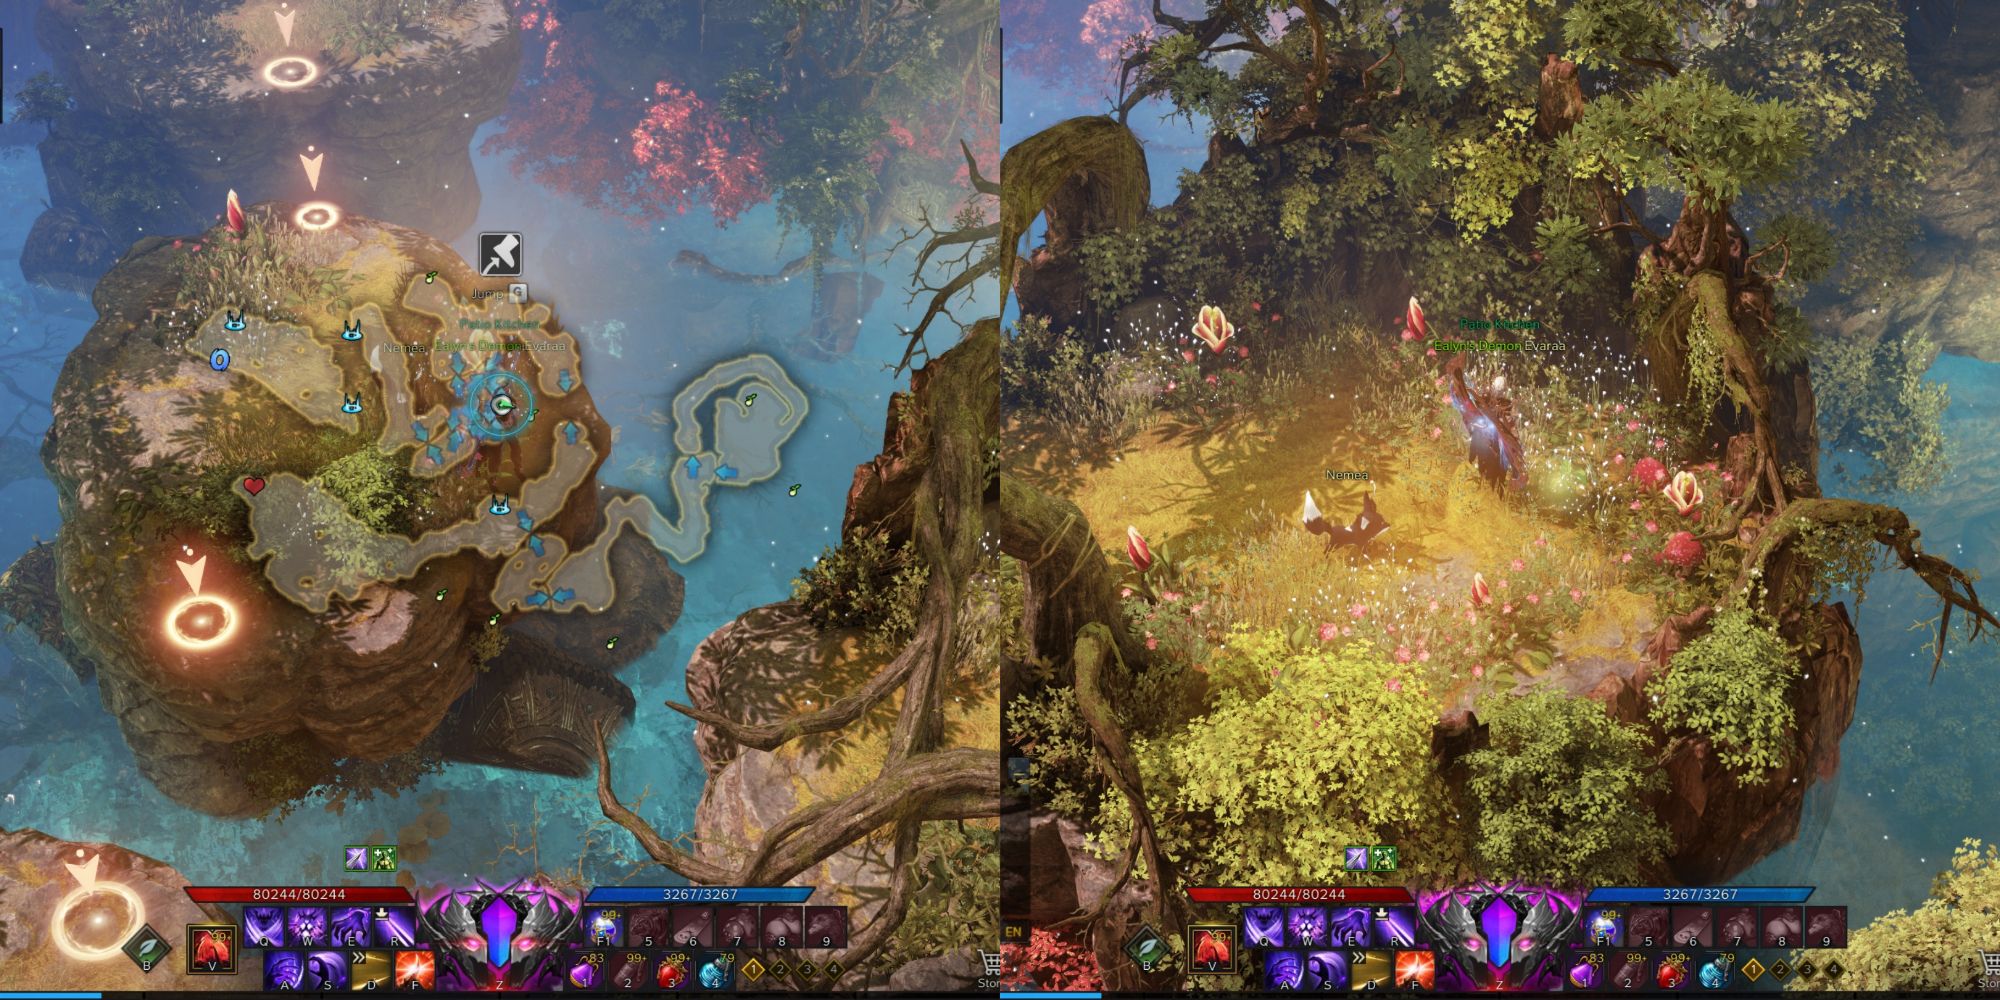 Lost Ark split image of Whispering Islet Mokoko Seed 2 location and its hidden entrance with minimap open